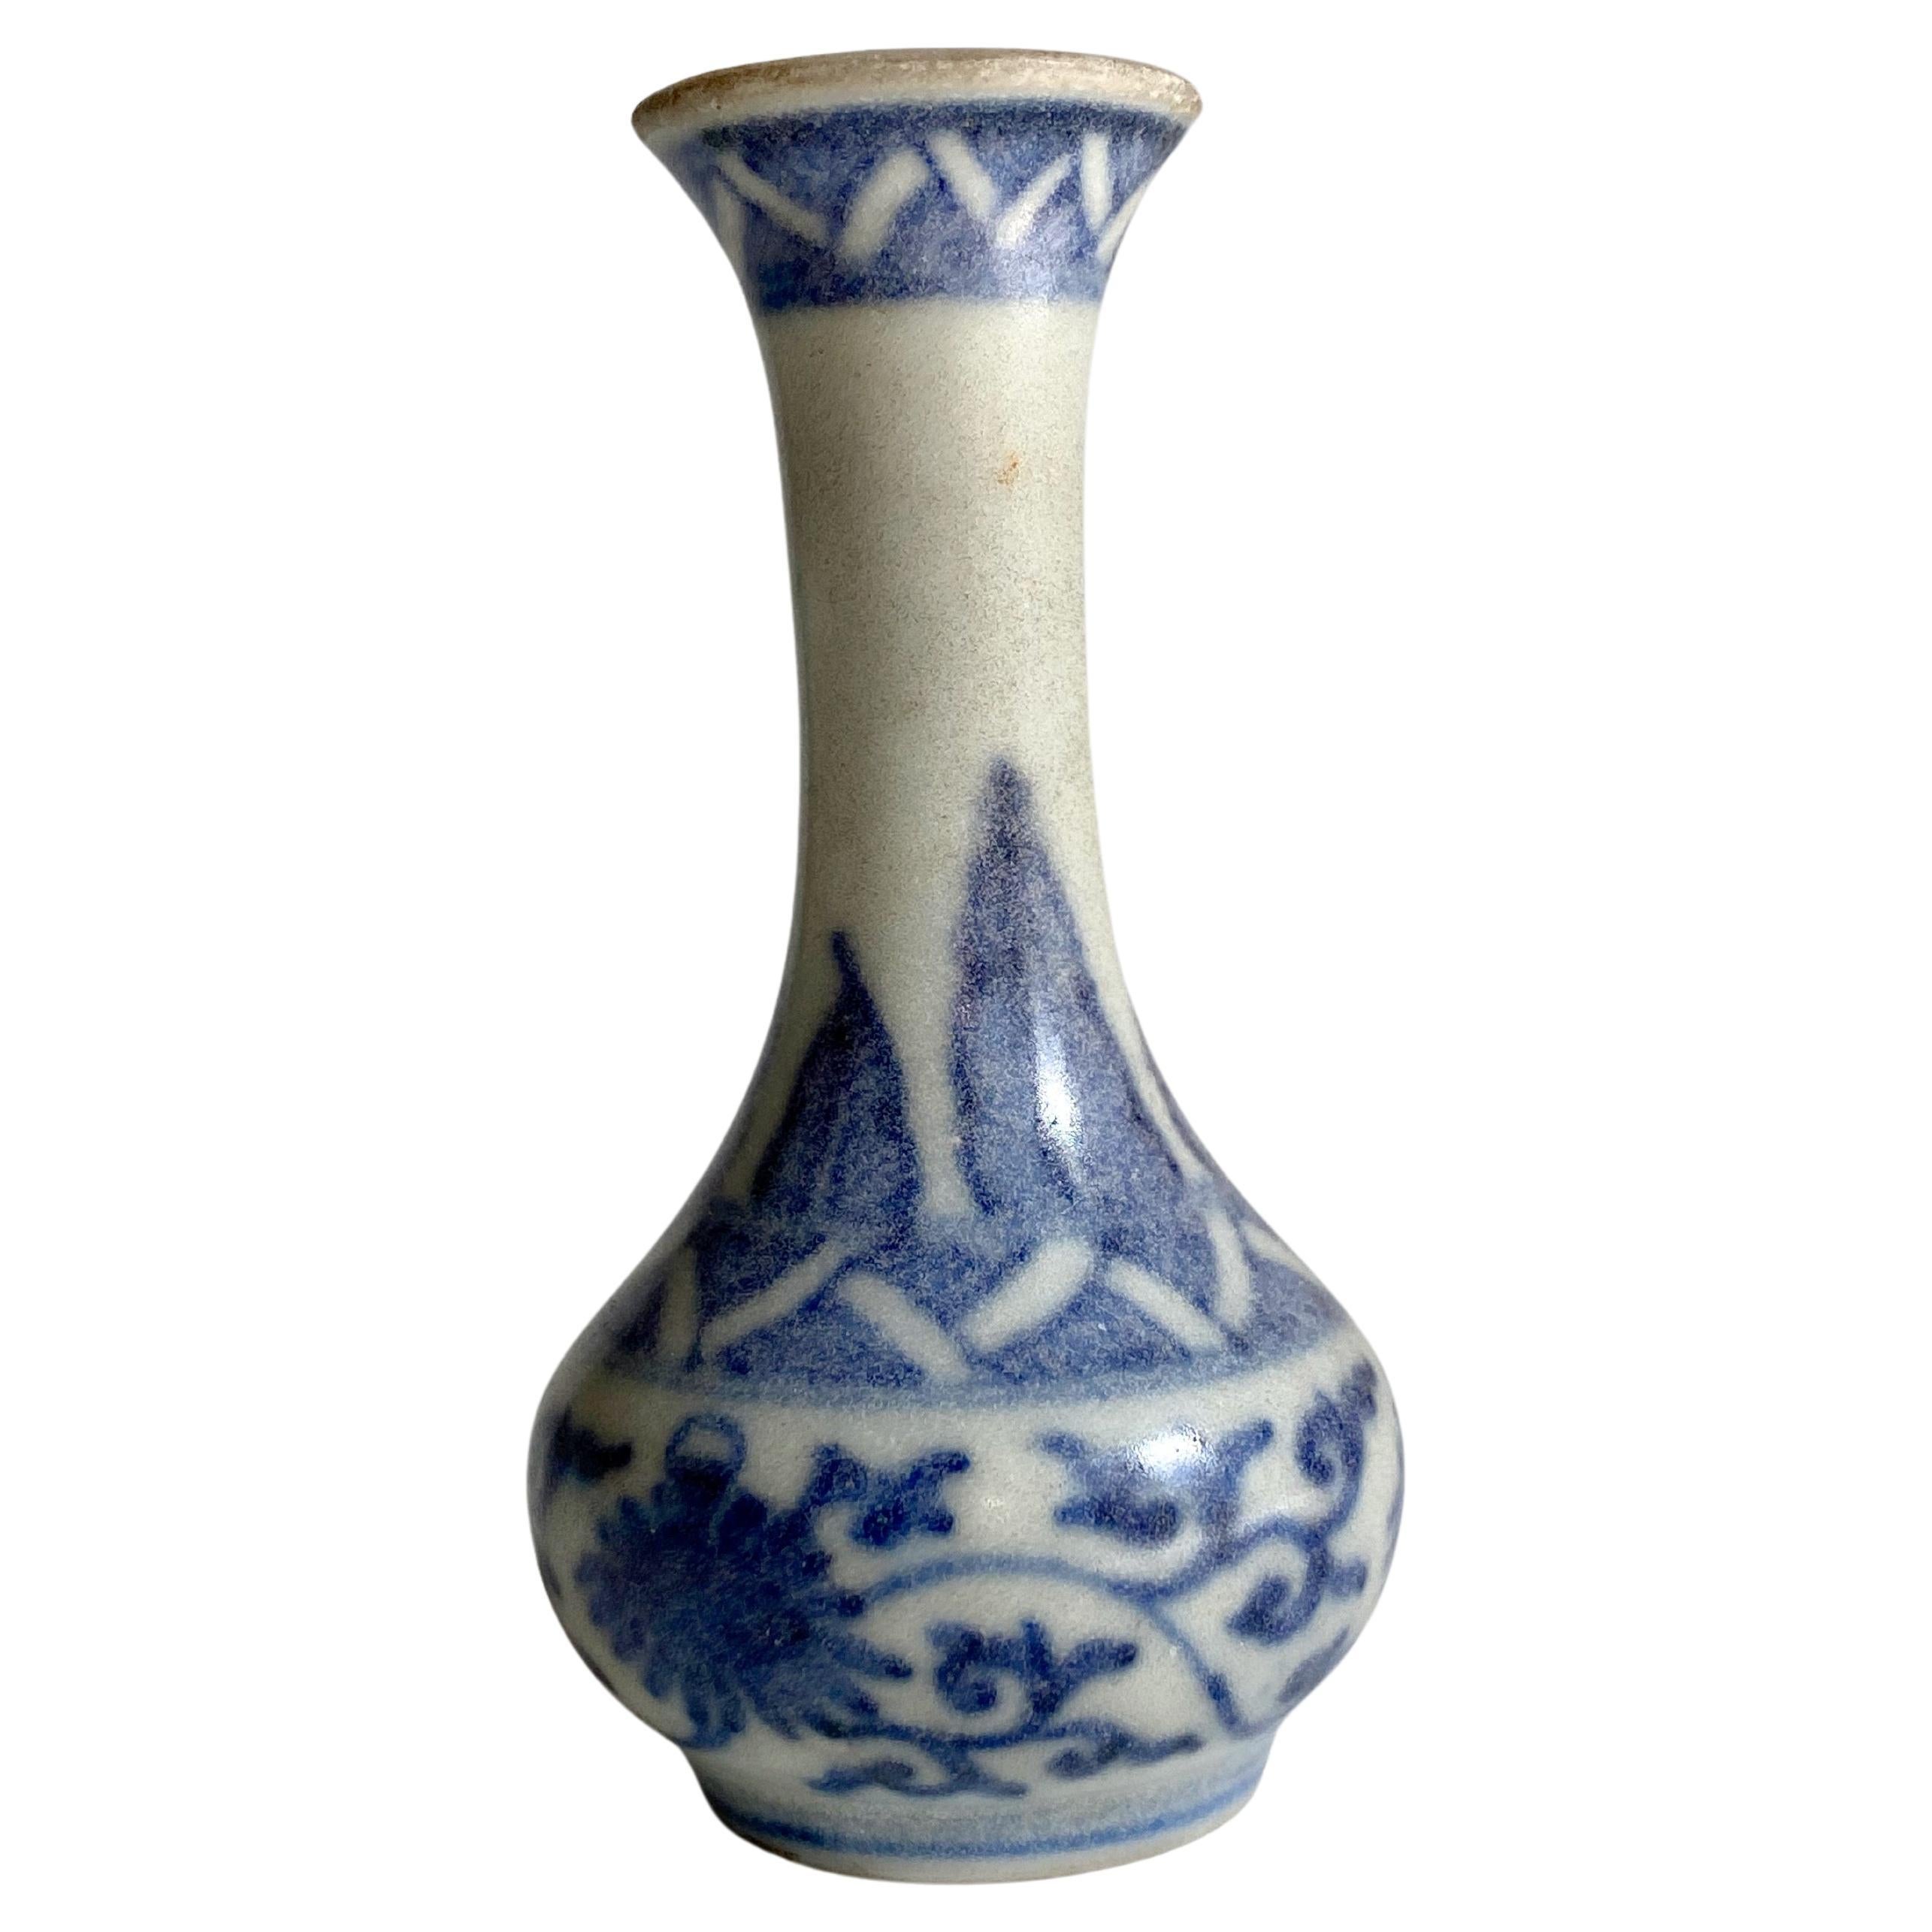 Miniature Vase from Hatcher Collection with Fluted Rim